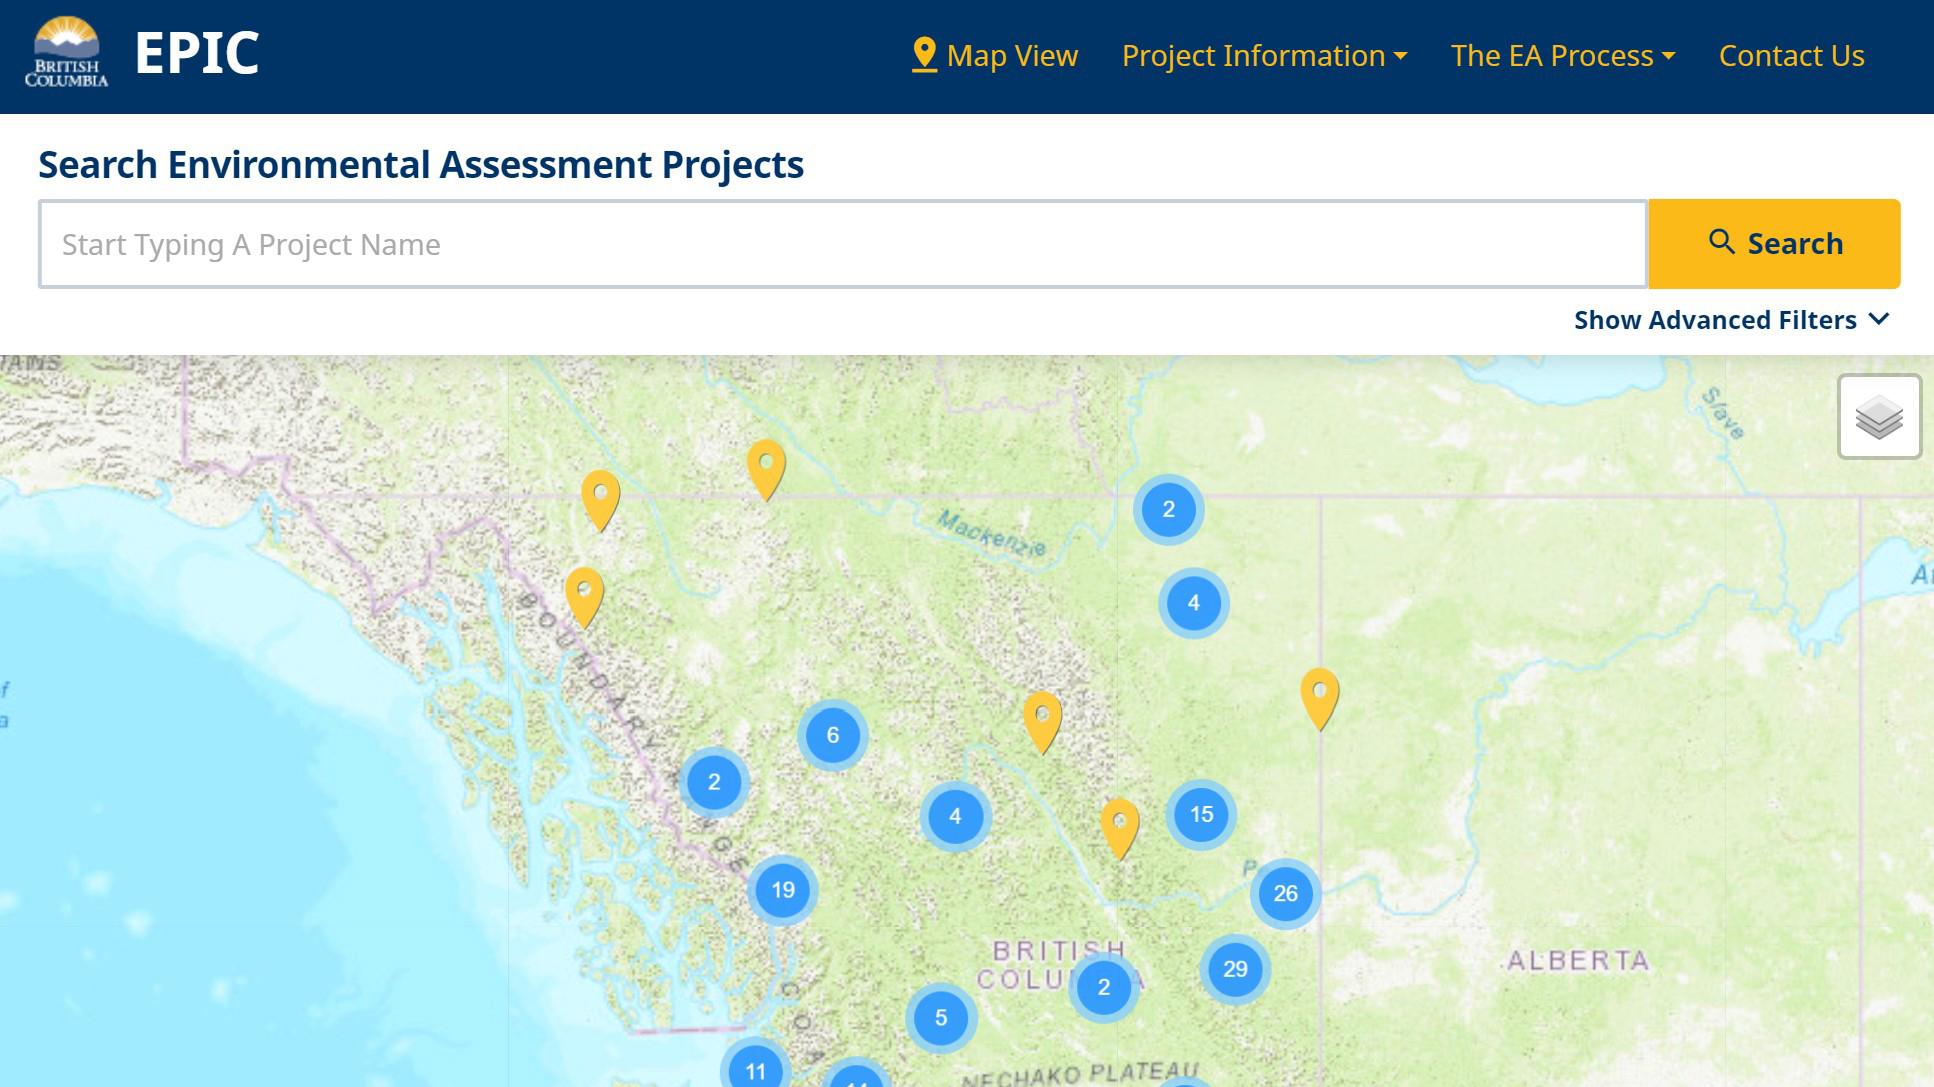 Image of B.C. map with project pinpoints